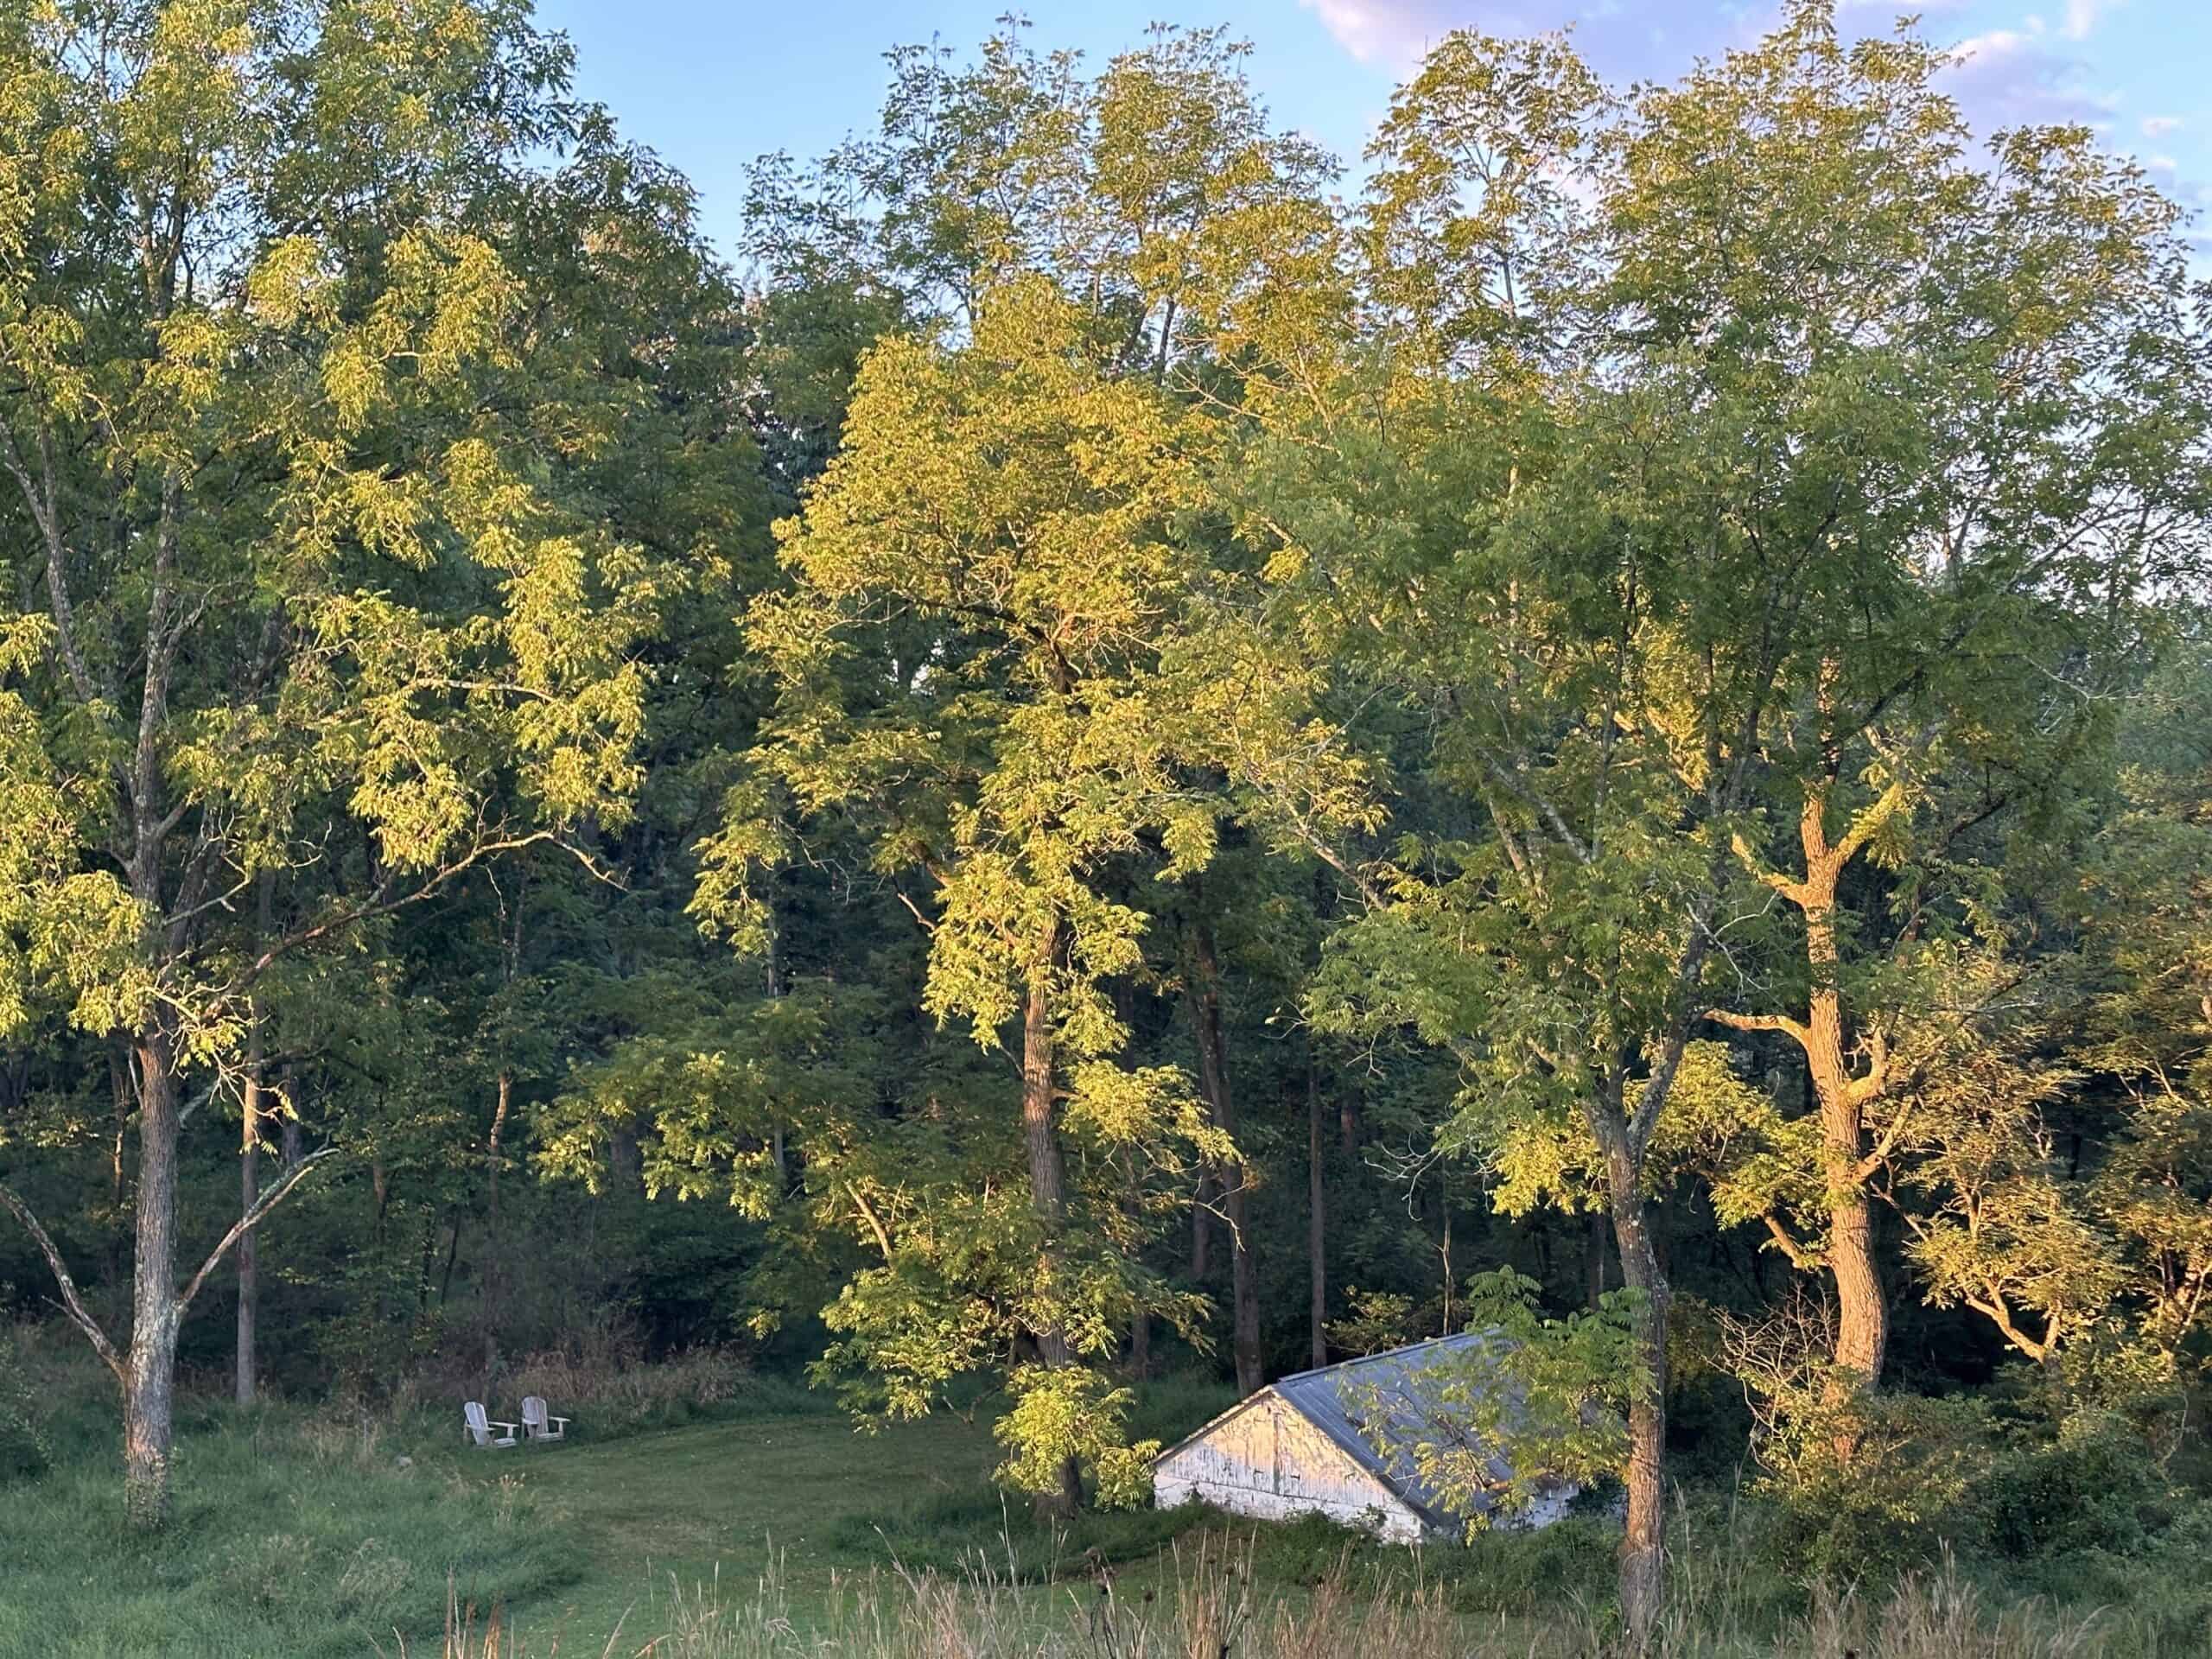 Early morning sun on trees over springhouse